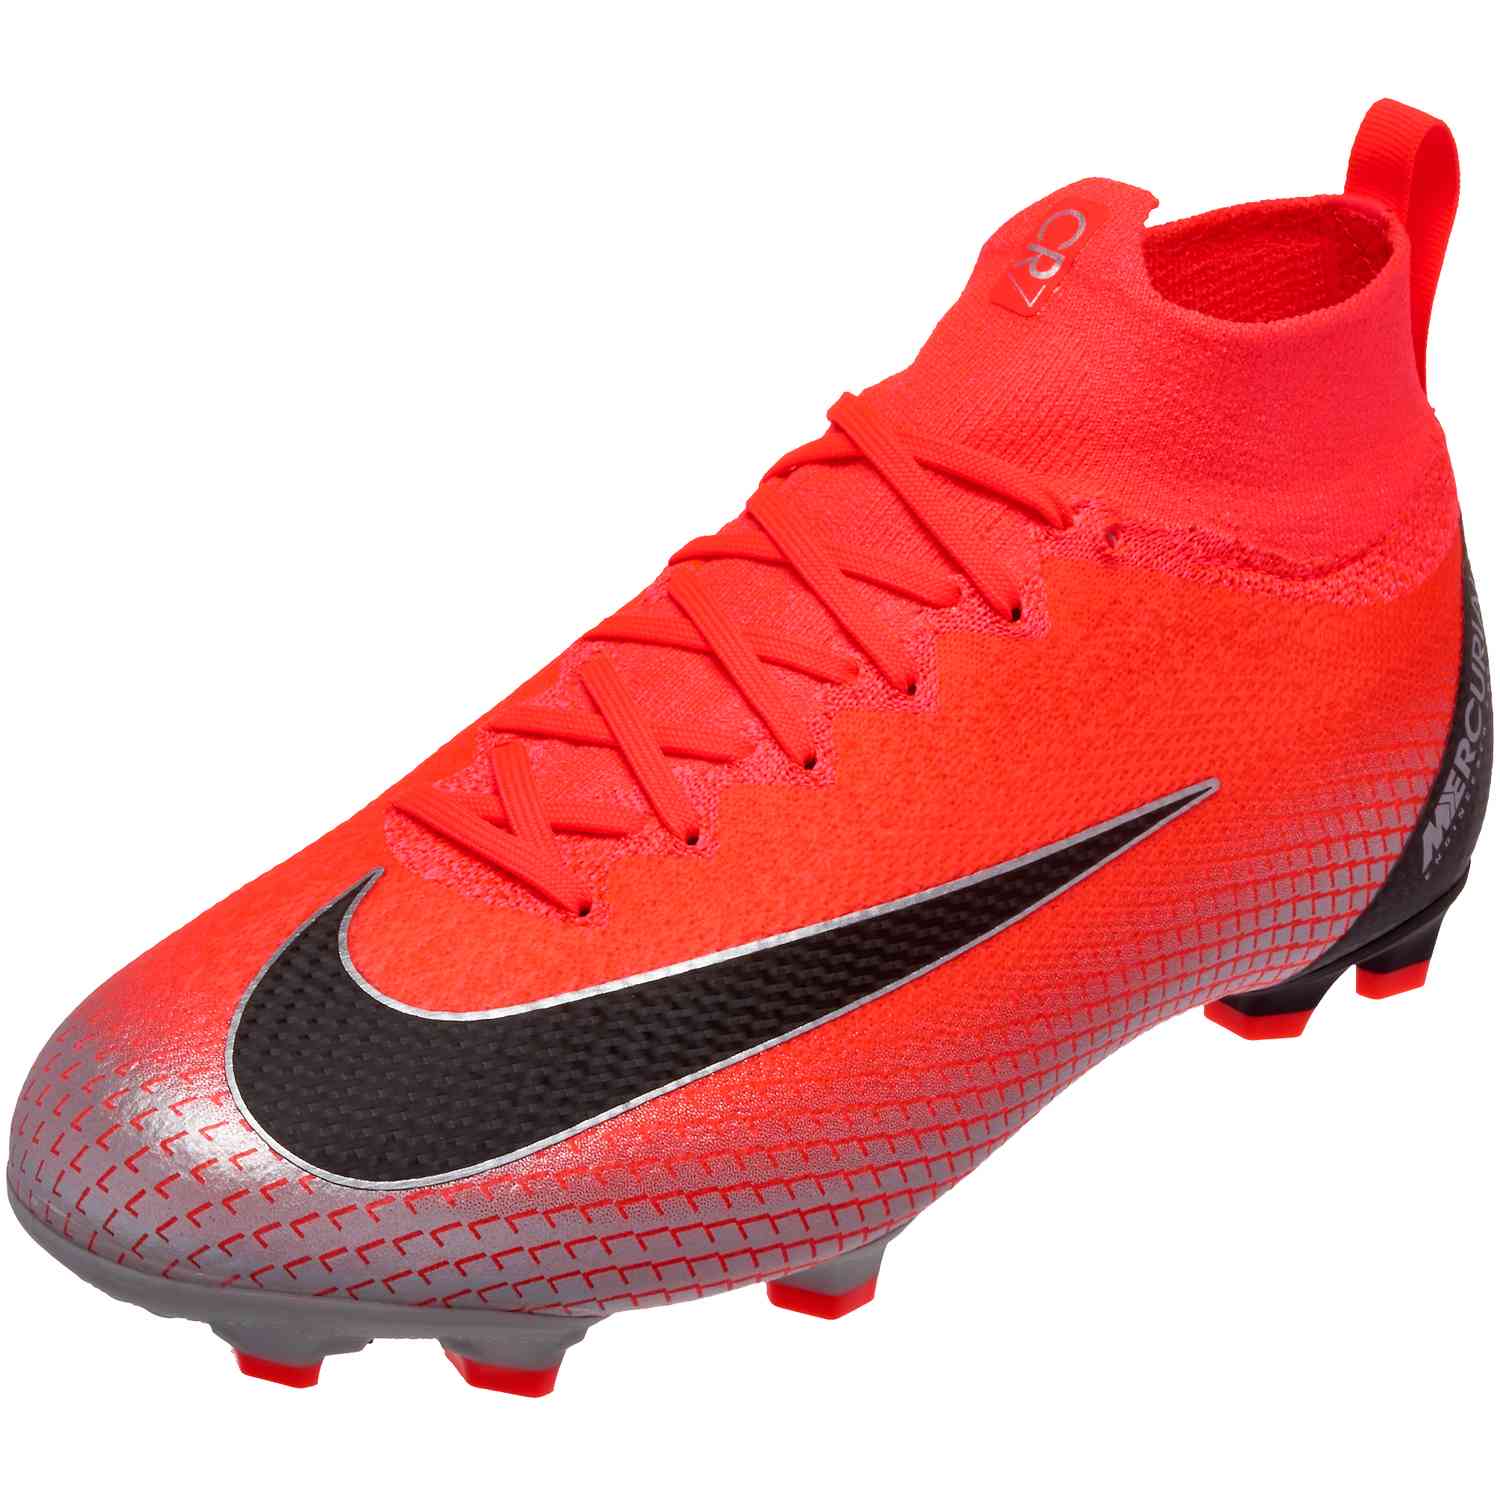 cr7 childrens boots